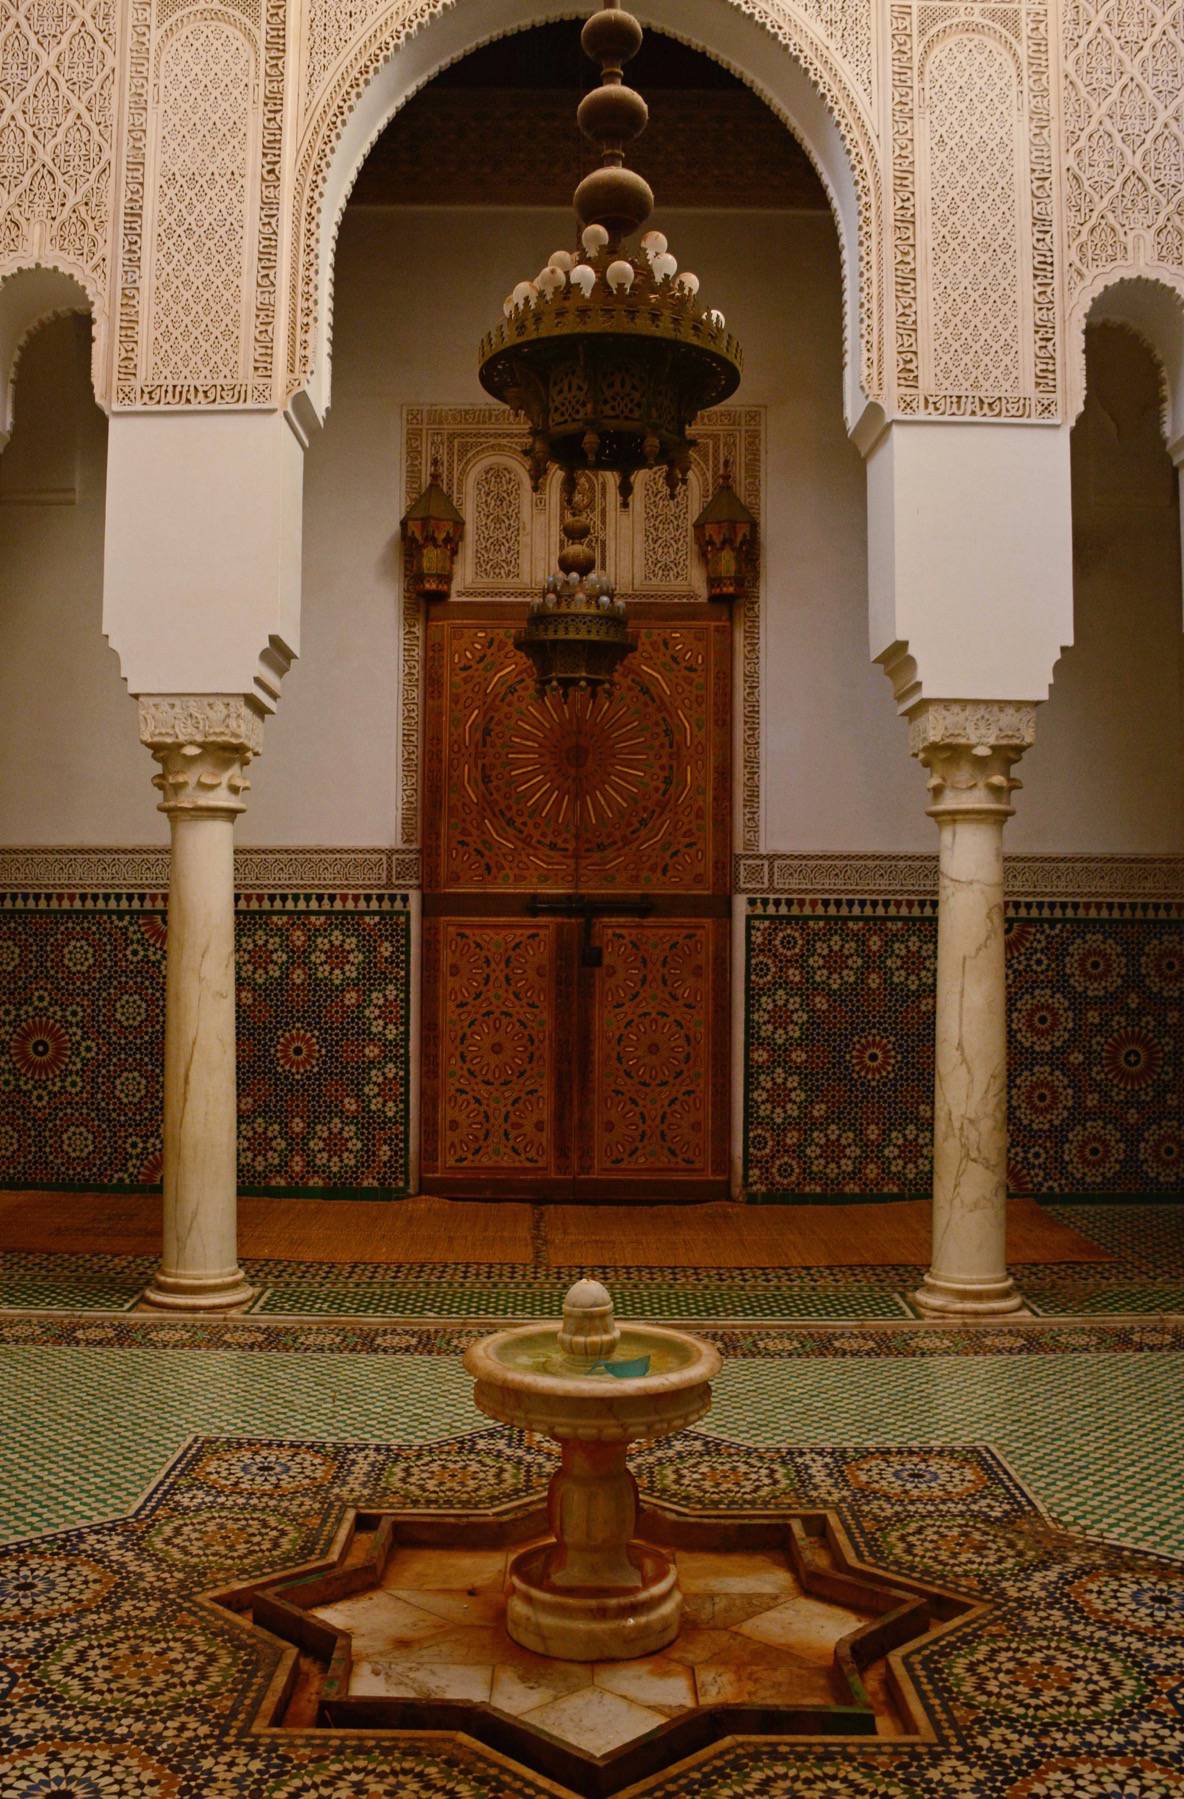 Mausoleum of Moulay Ismail, Meknes